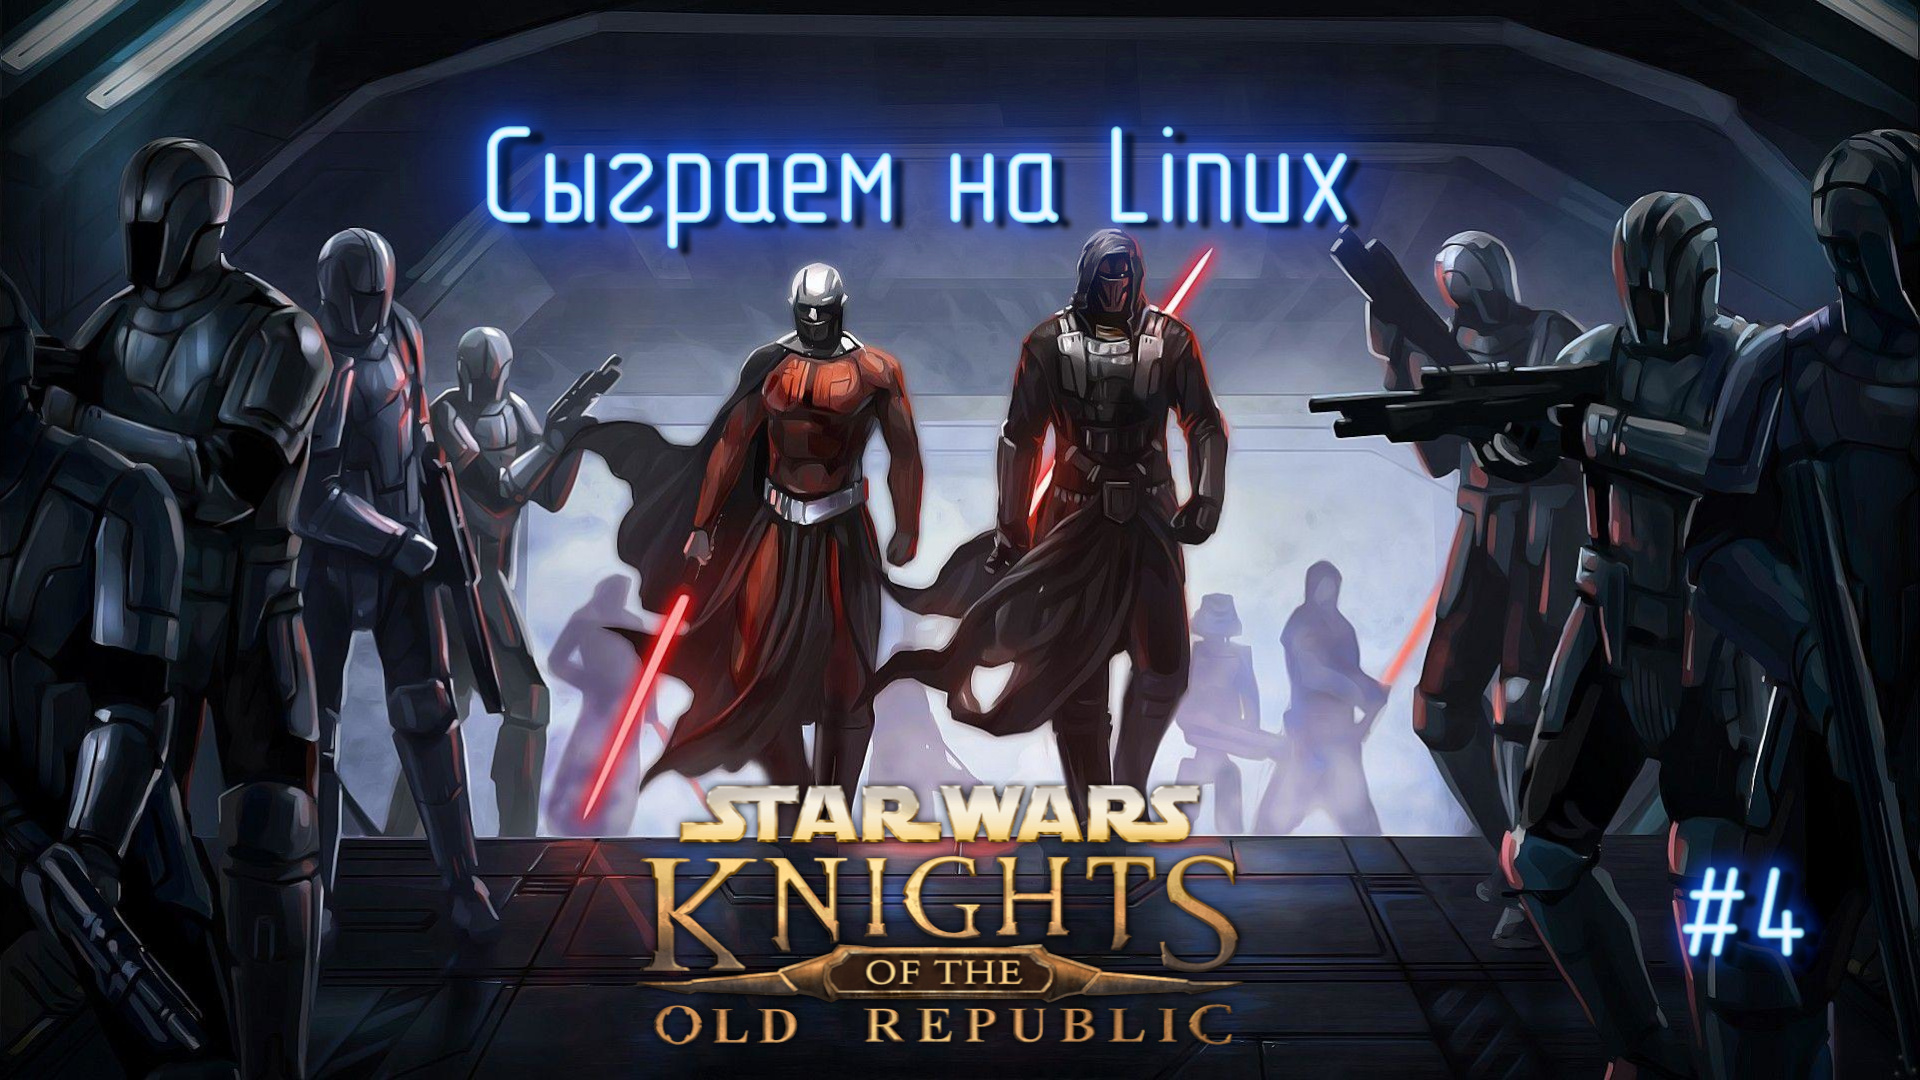 Star wars the knight of the old republic русификатор steam фото 39